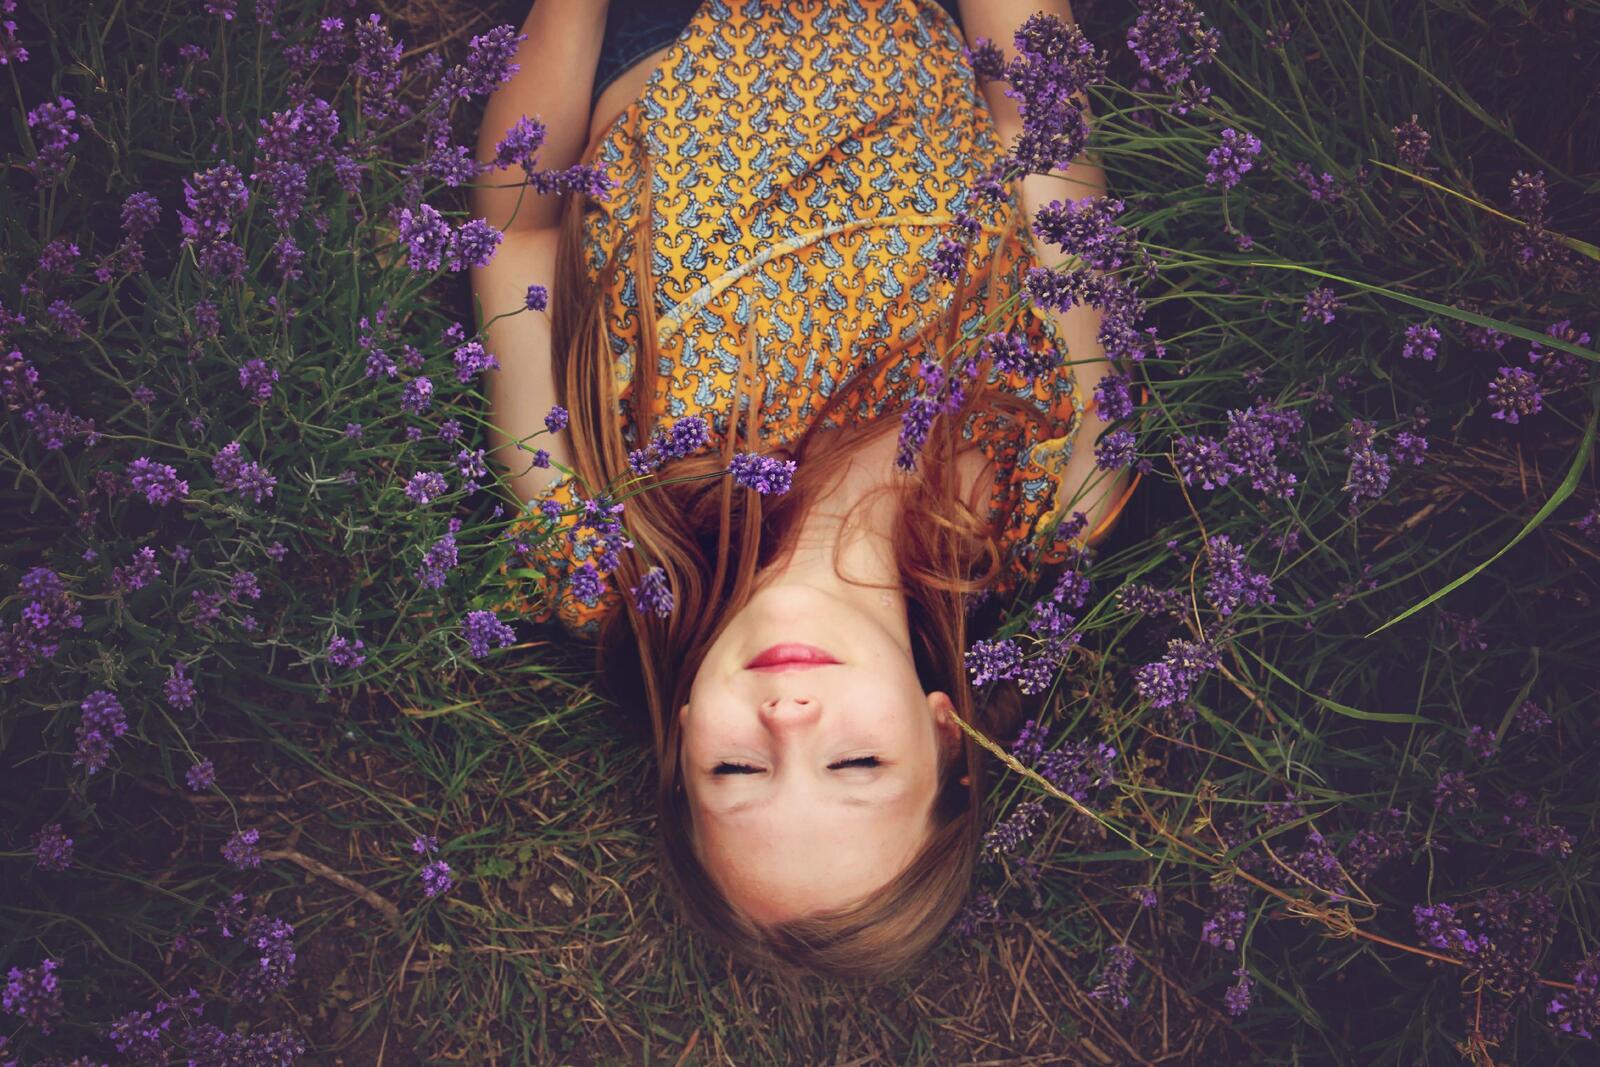 Free photo A girl lies in a field with purple flowers